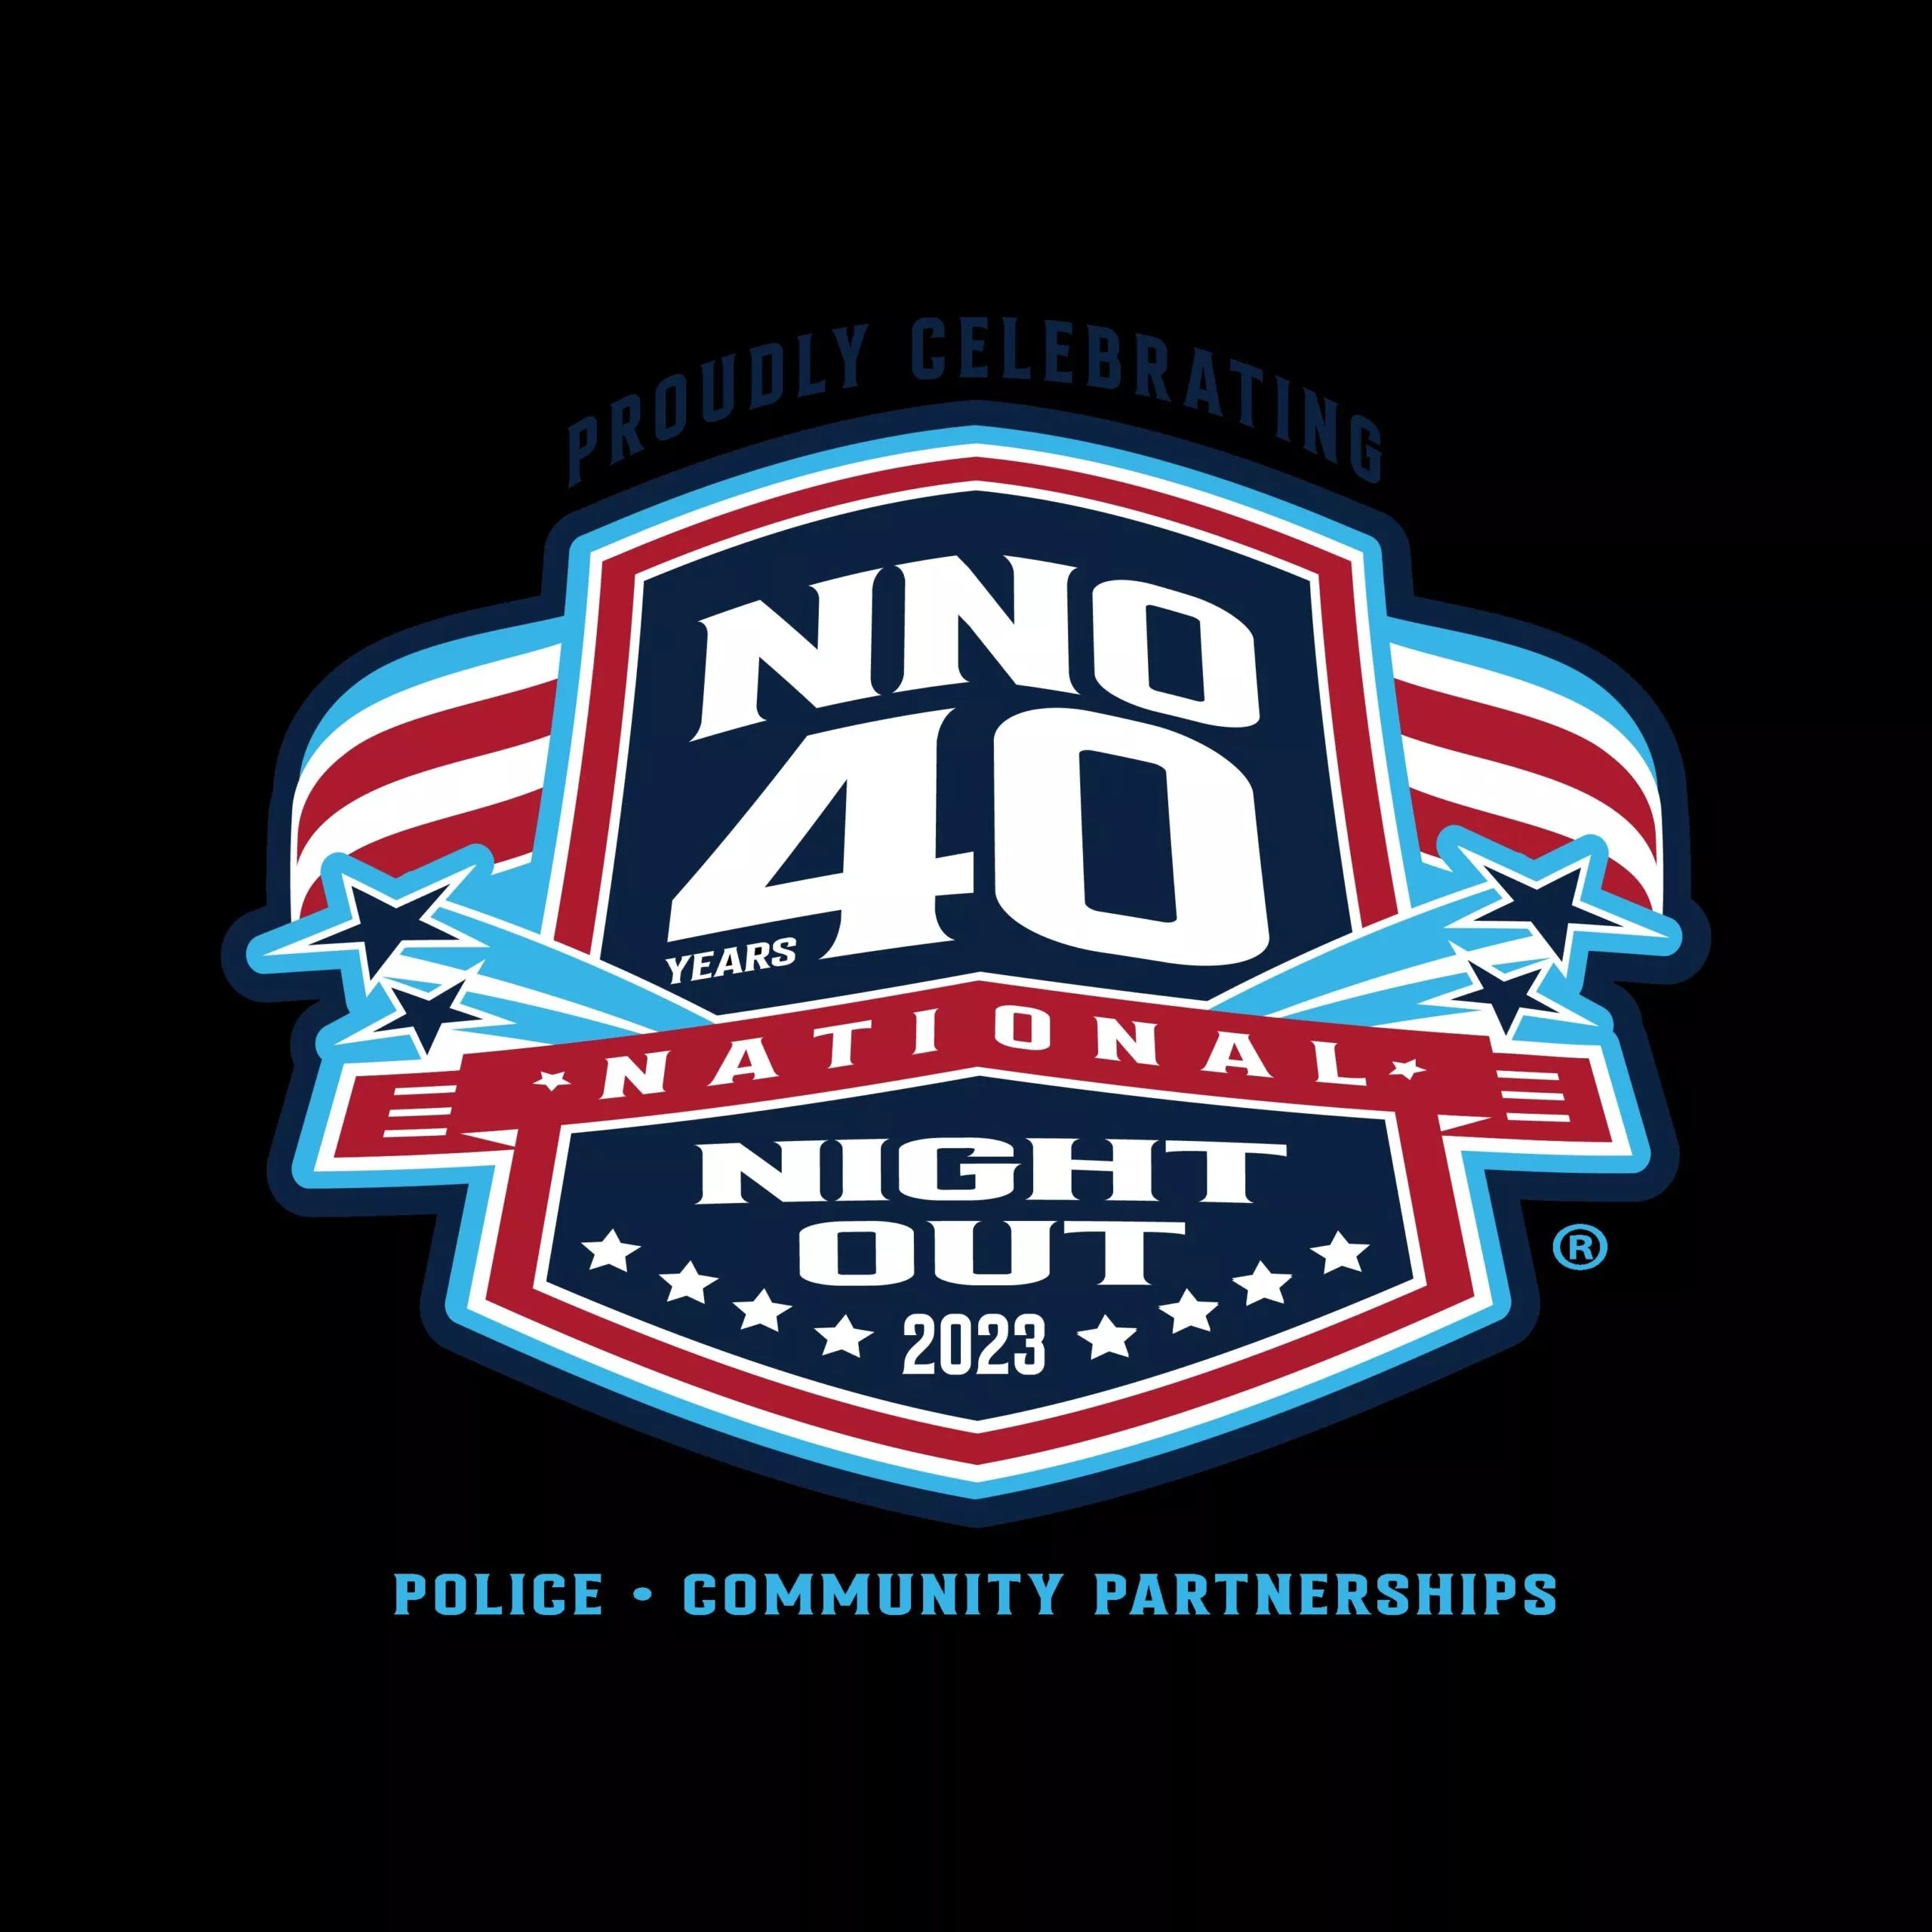 Get to Know Your Neighbors at National Night Out